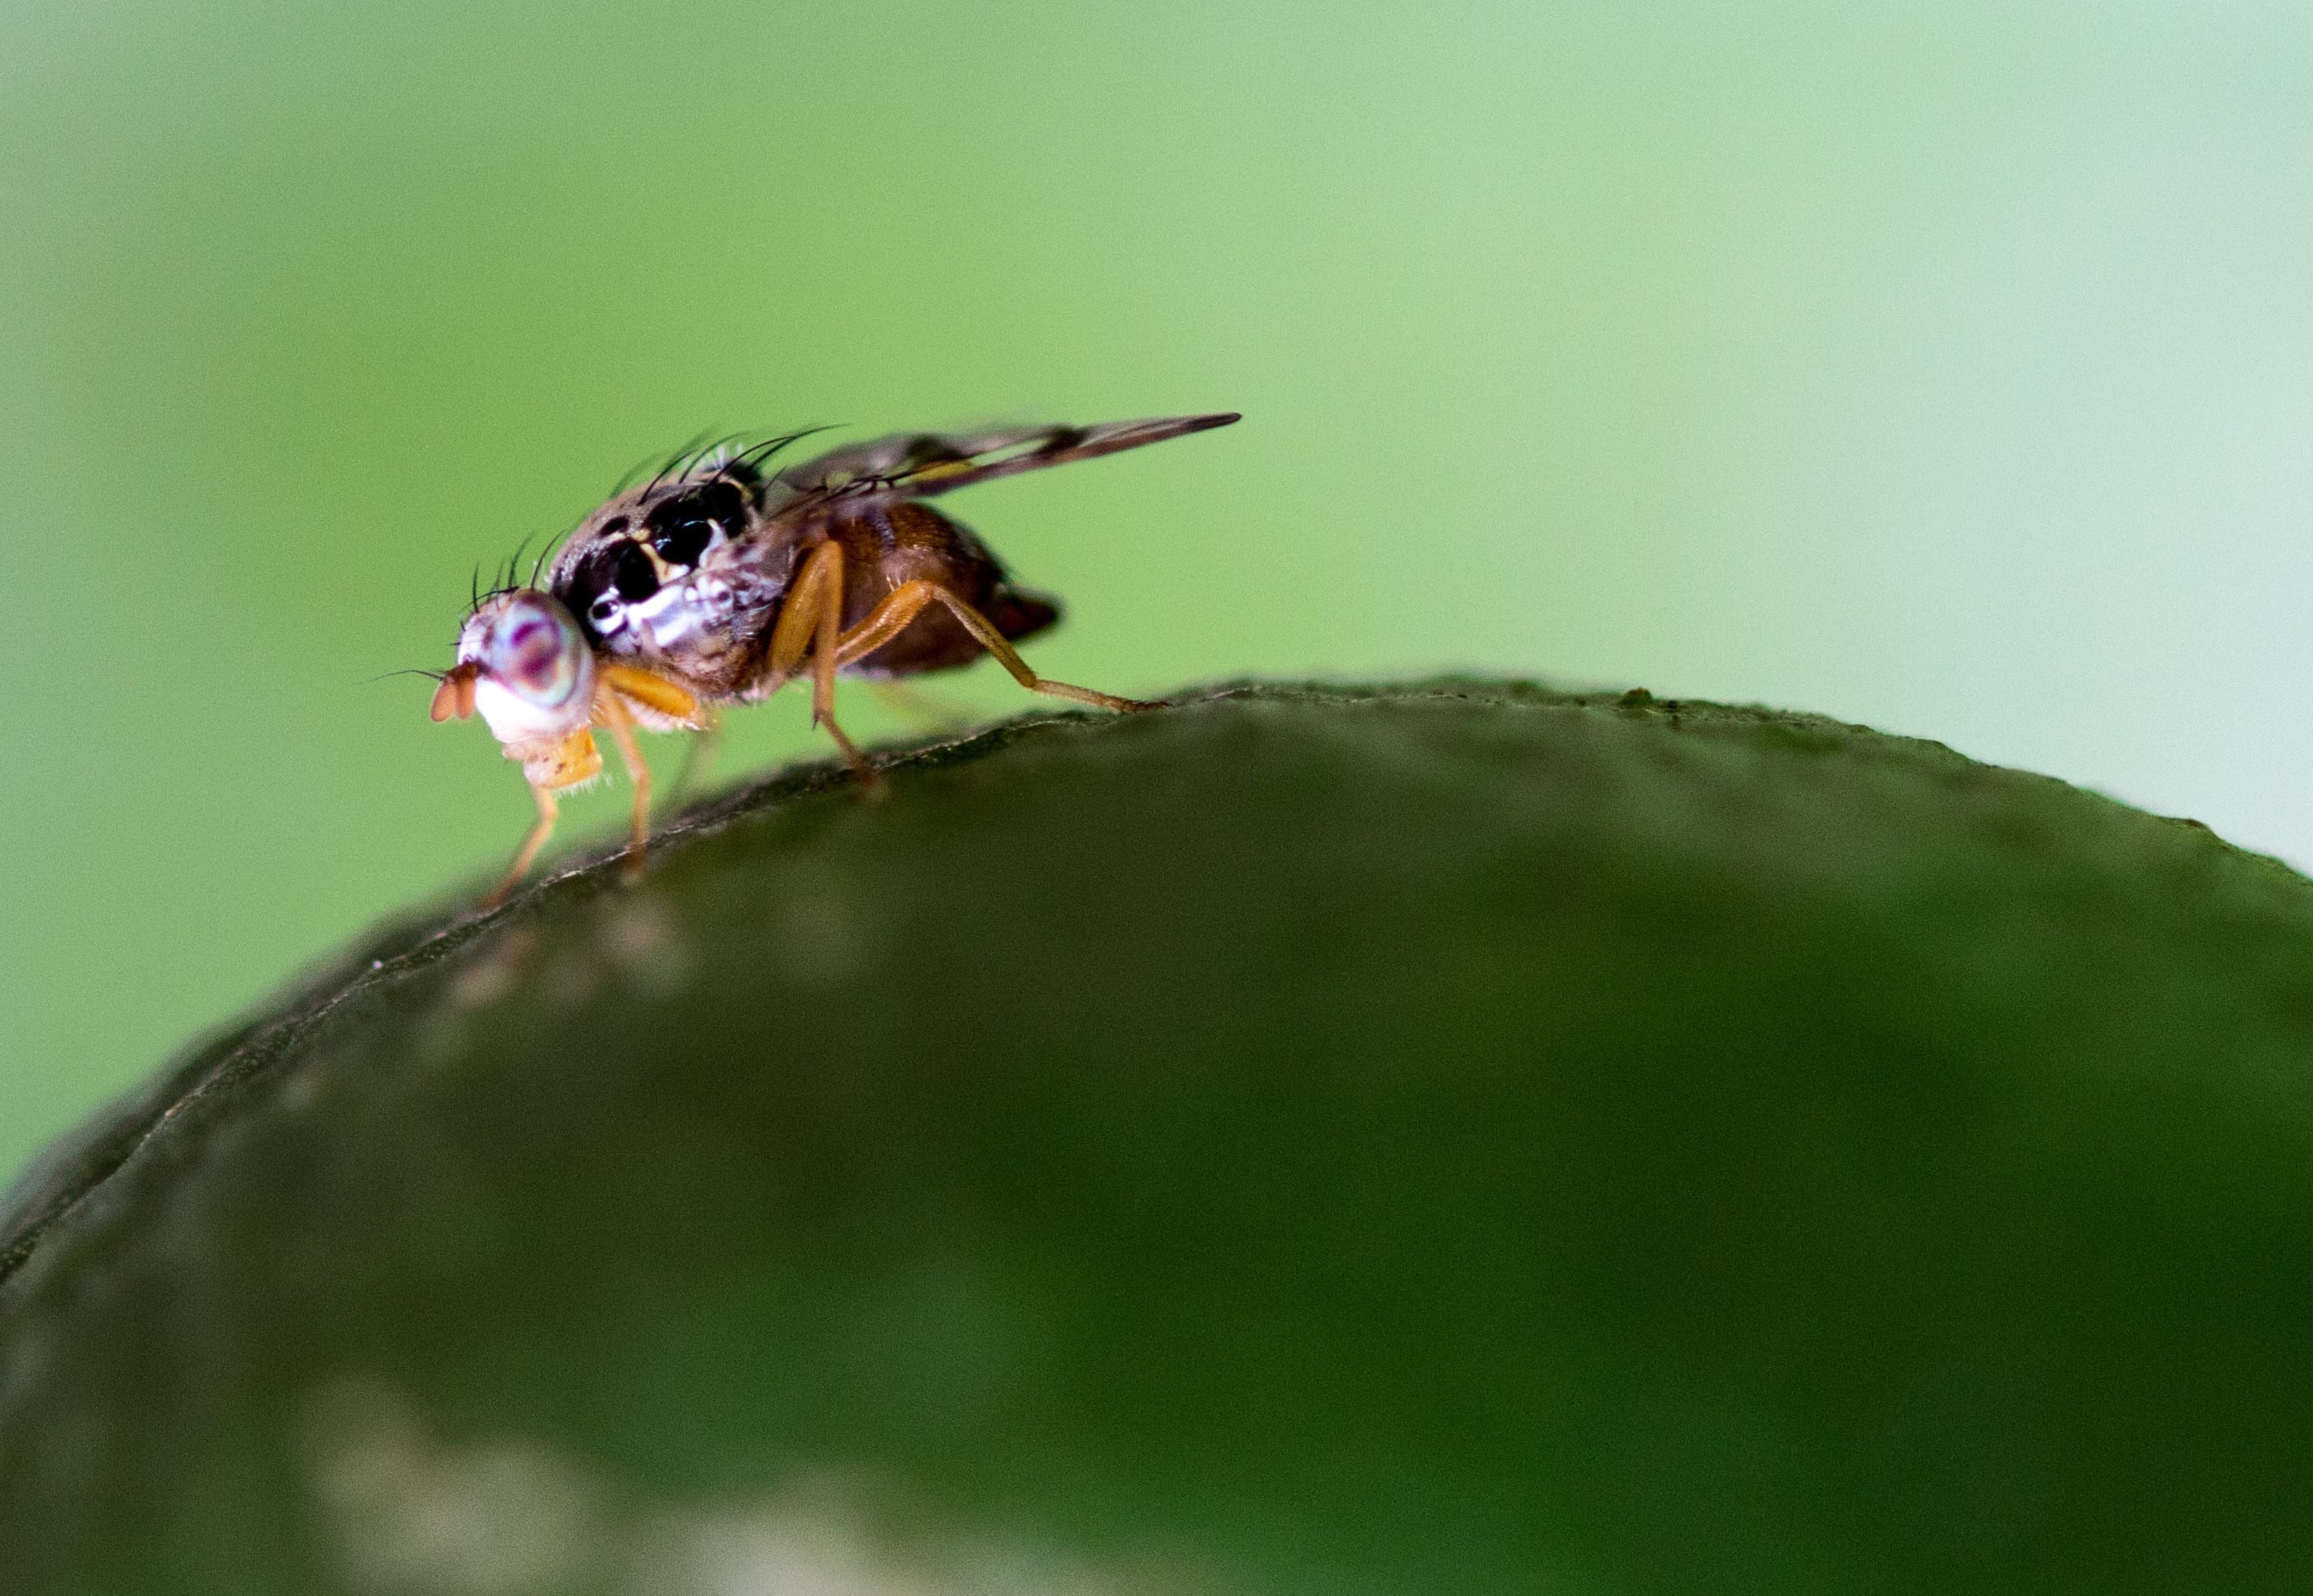 Mediterranean fruit flies modified in the lab to produce more males